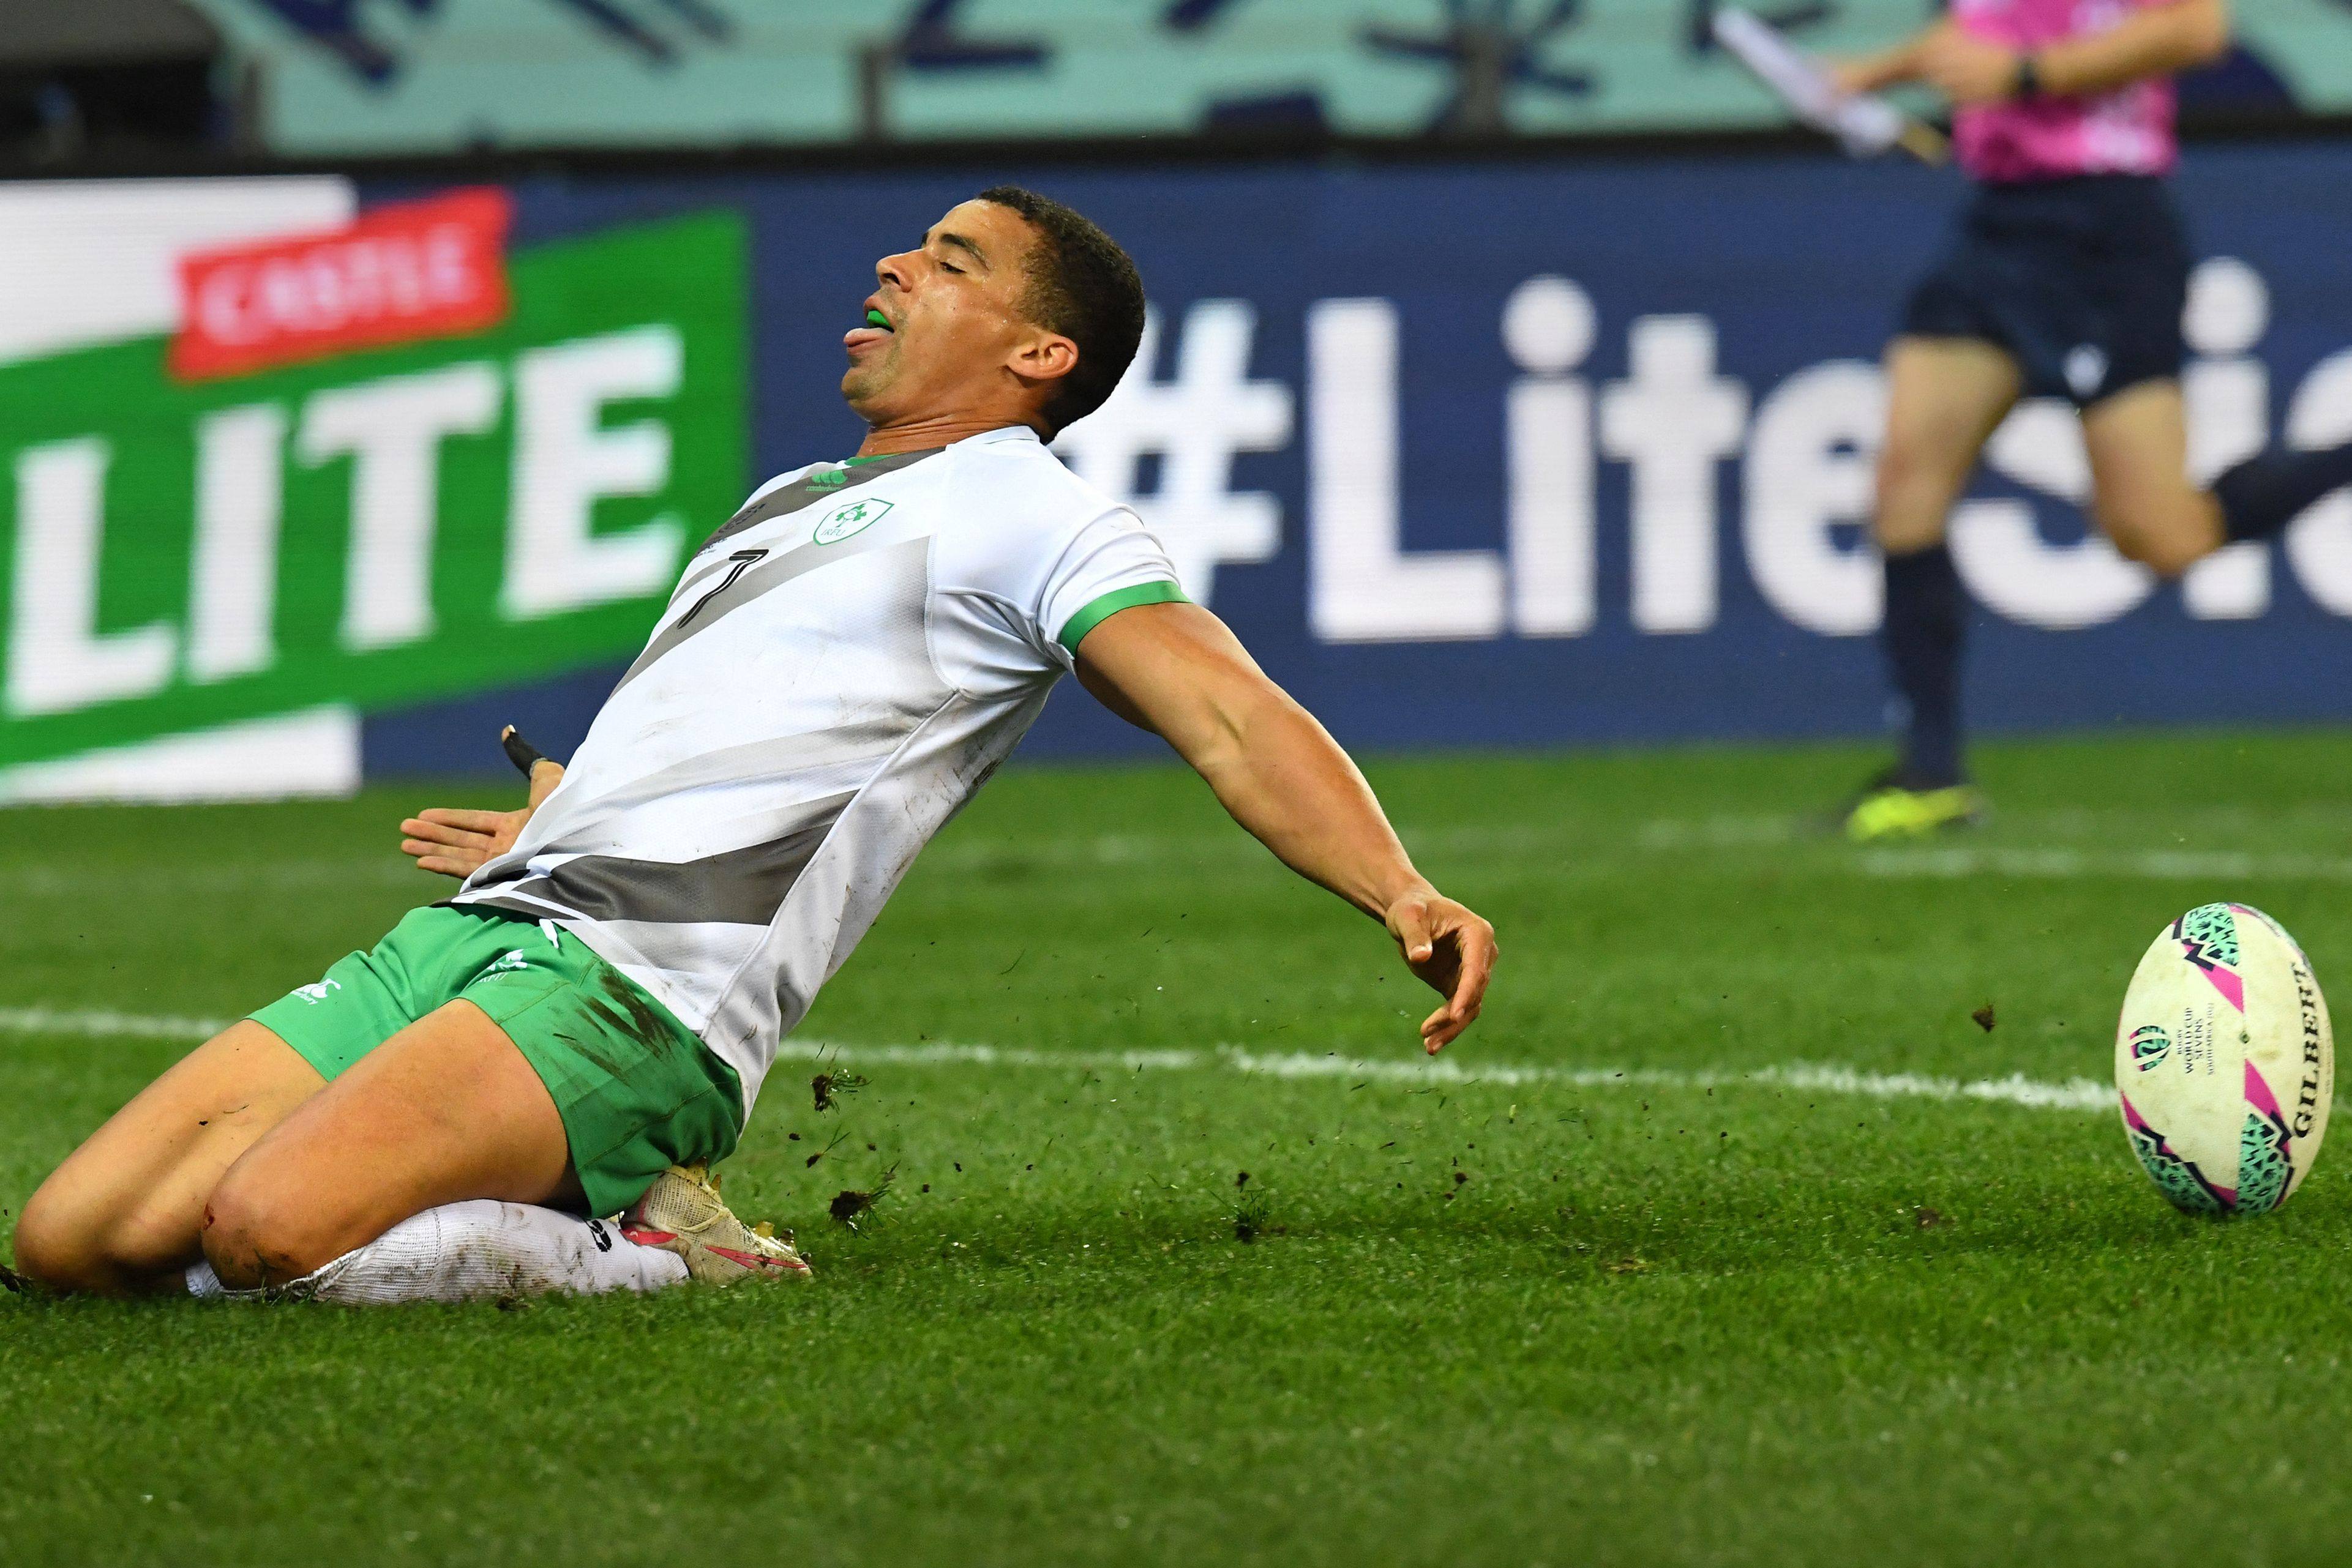 Jordan Conroy of Ireland scores a try against South Africa at the Rugby World Cup Sevens in Cape Town. Photo: AFP